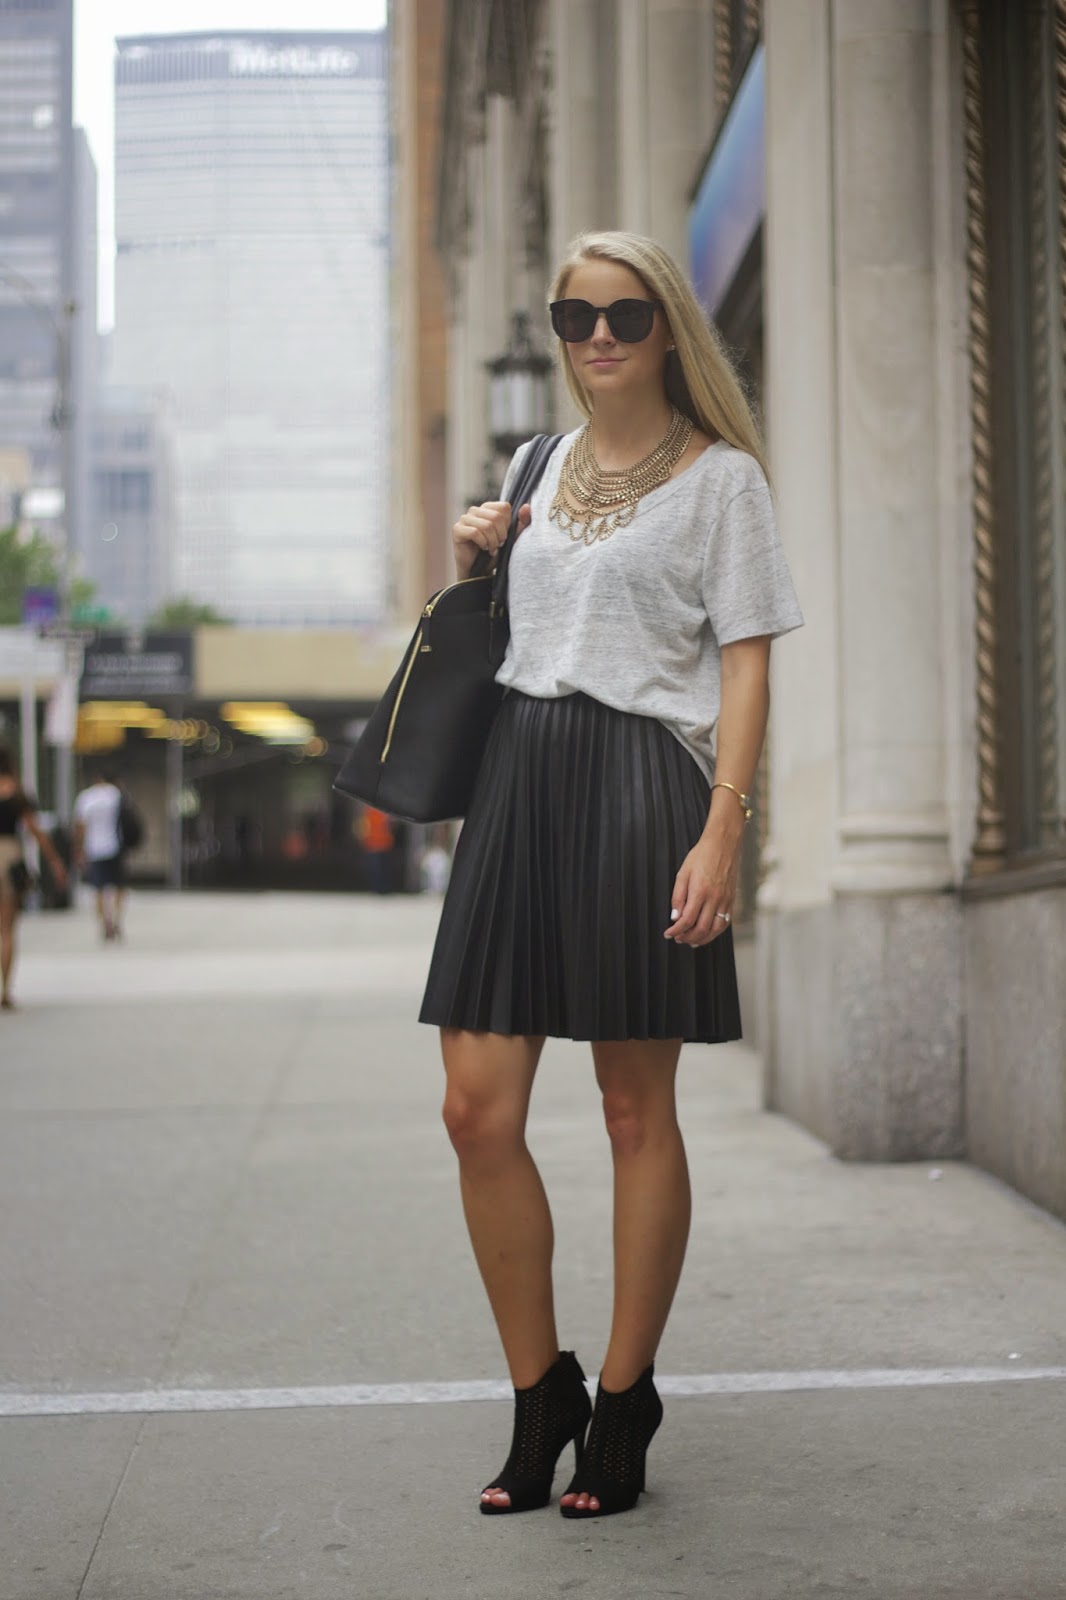 FAUX LEATHER SKIRT - Styled Snapshots